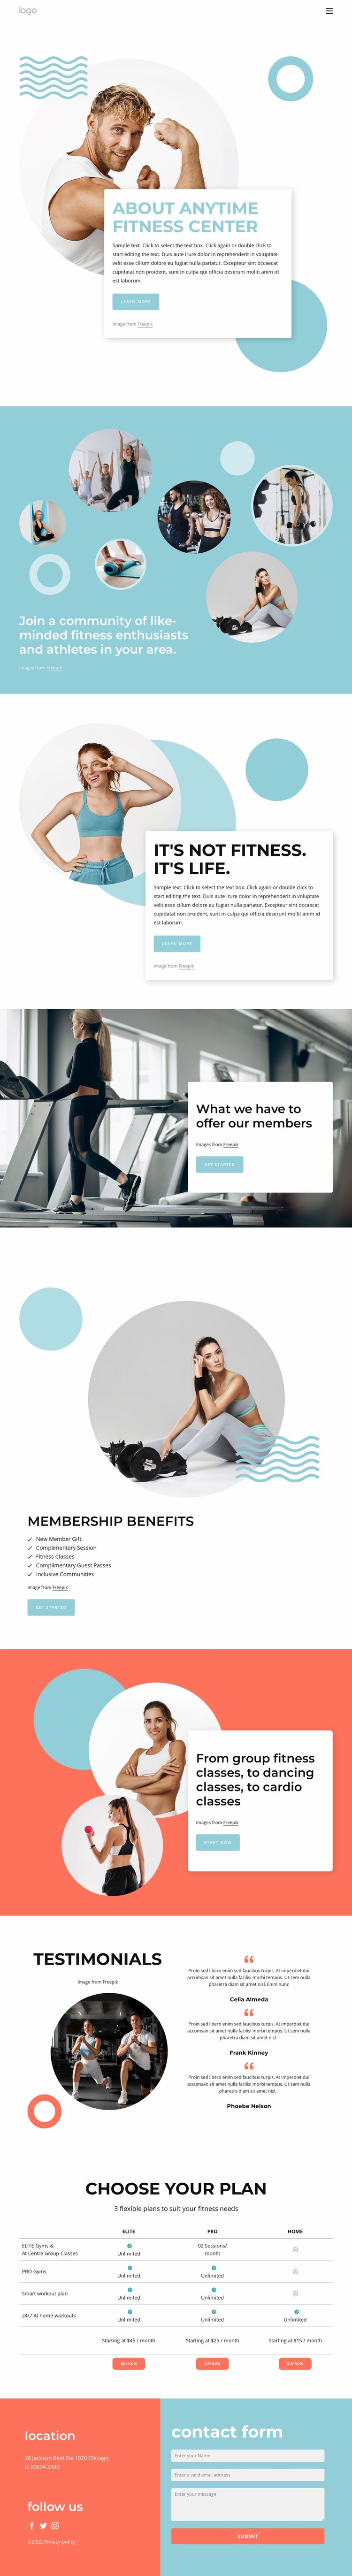 About Anytime fitness center WordPress Website Builder